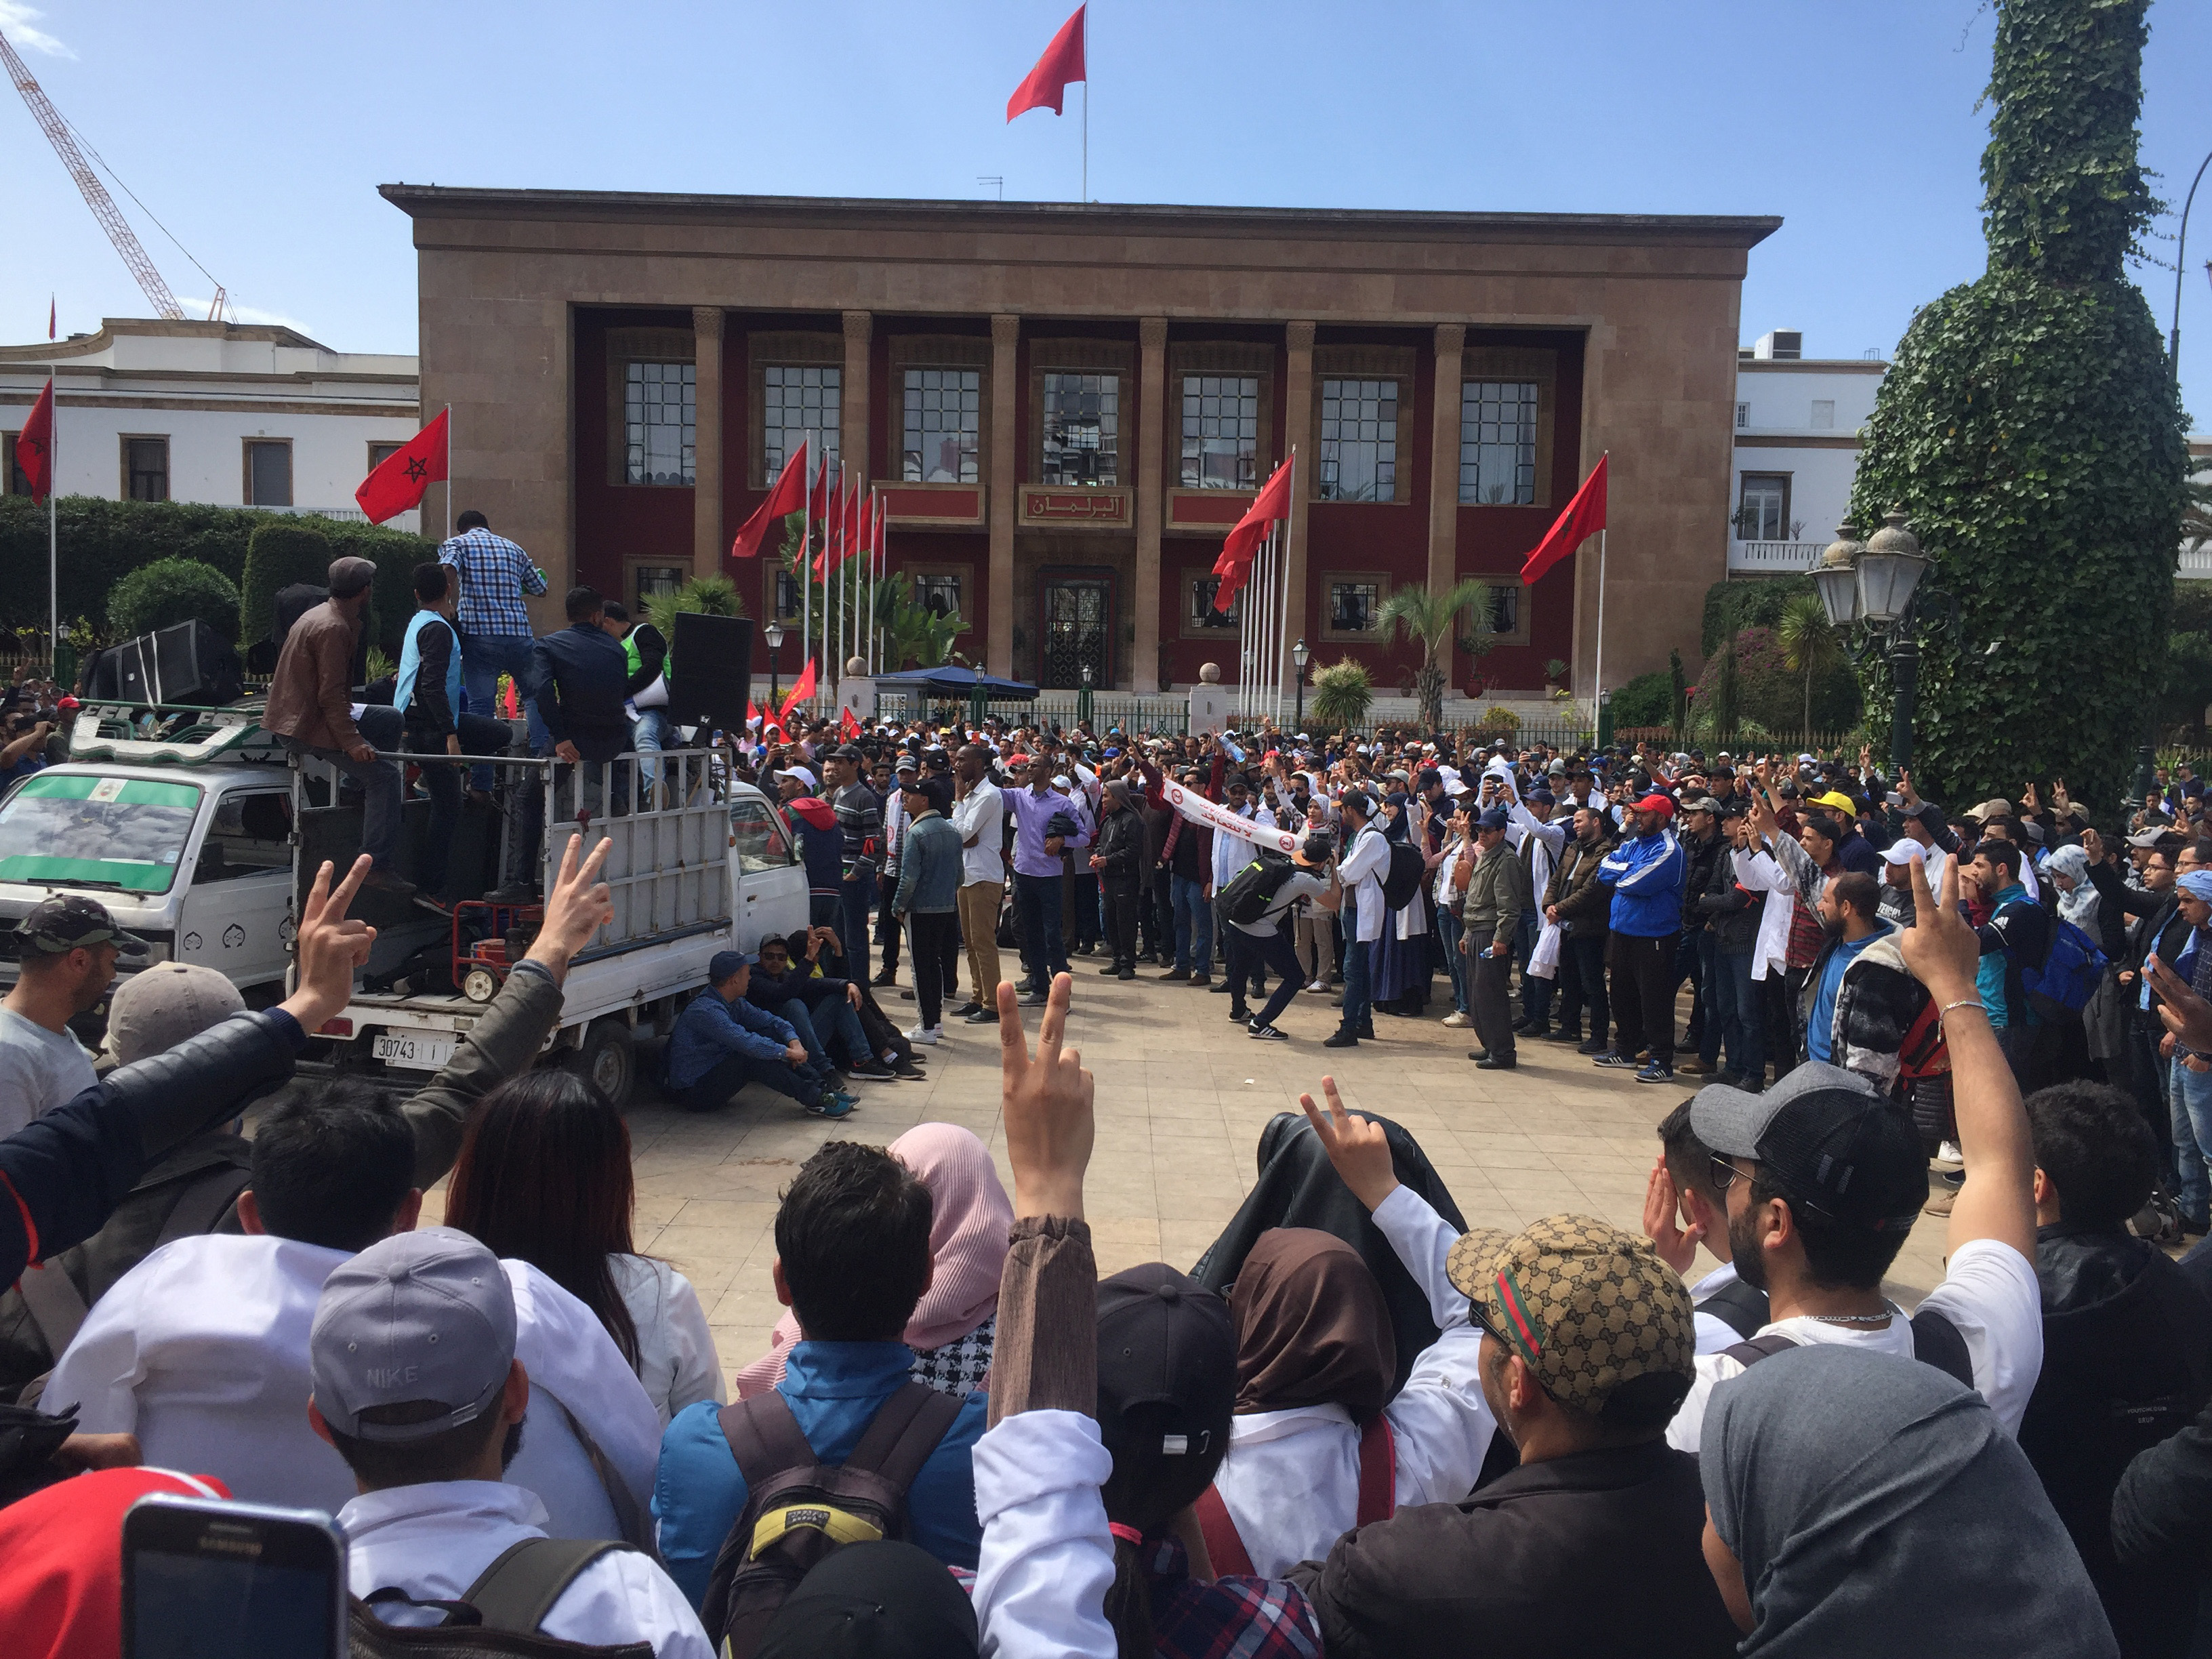 Thousand of Moroccan teachers shout in front of the Moroccan Parliament during a protest and the latest outbreak of anger at low-wage, temporary teaching contracts in Rabat, Morocco, Sunday March 24, 2019. The protesters demand respect for their profession and higher wages.( AP Photo/Amira El Masaiti)